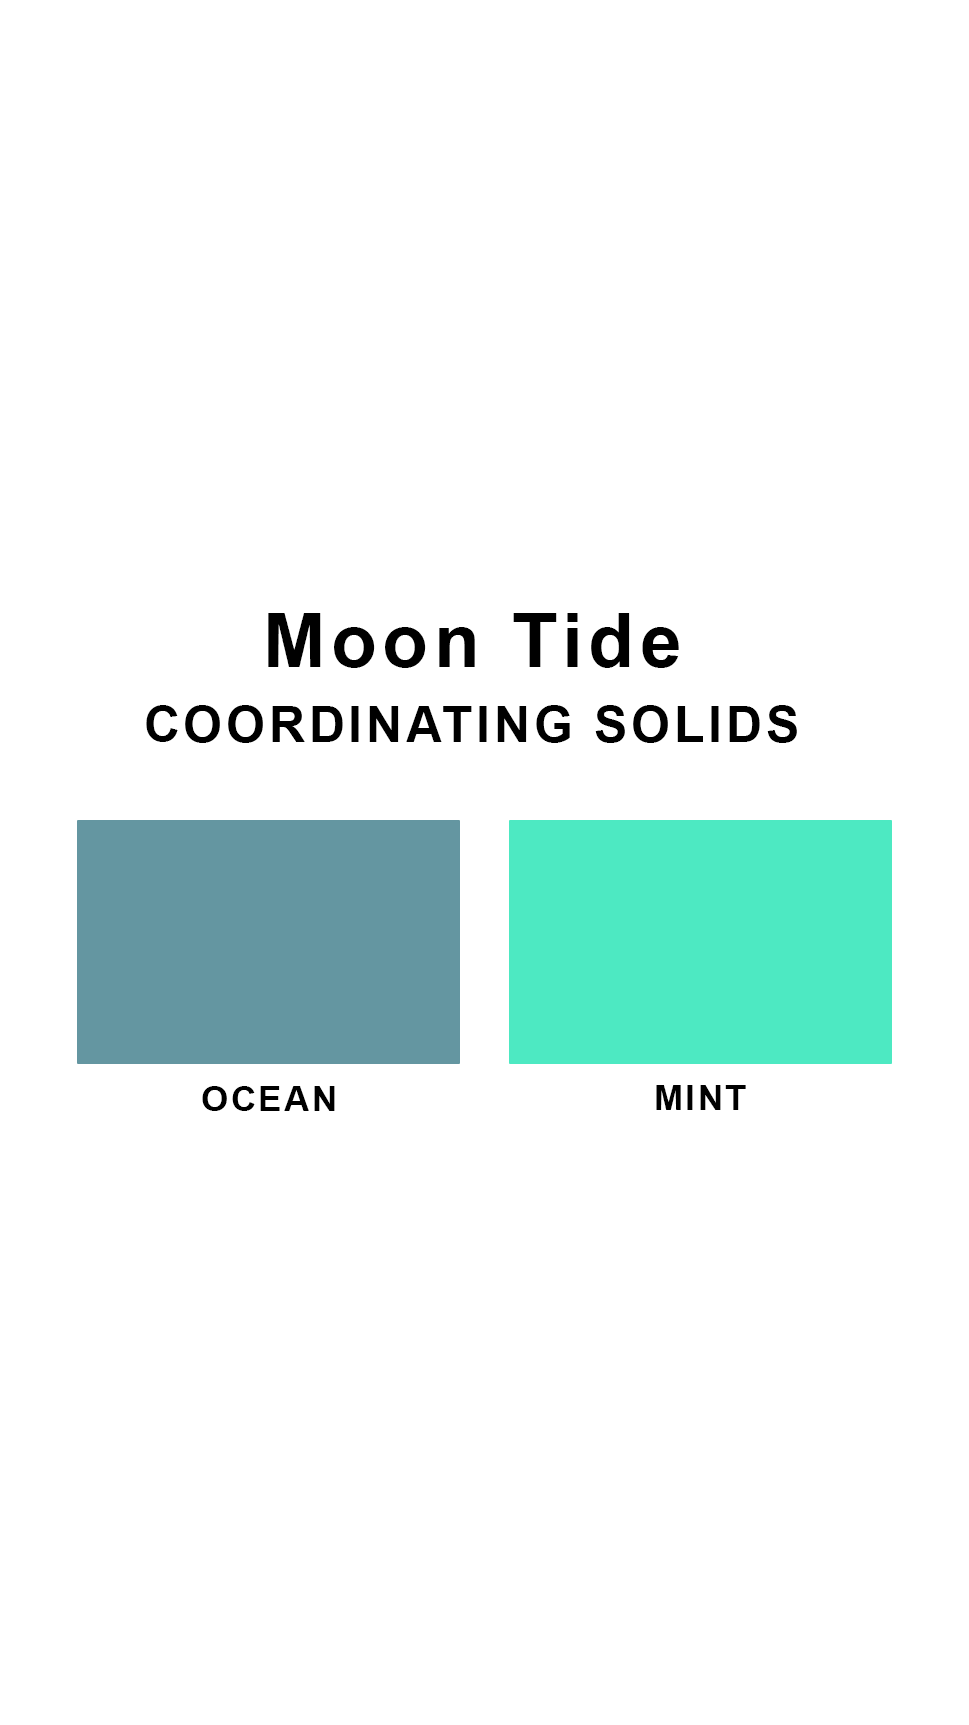 Coordinating solids chart for Sunsets Moon Tide swimsuit print: Ocean and Mint
